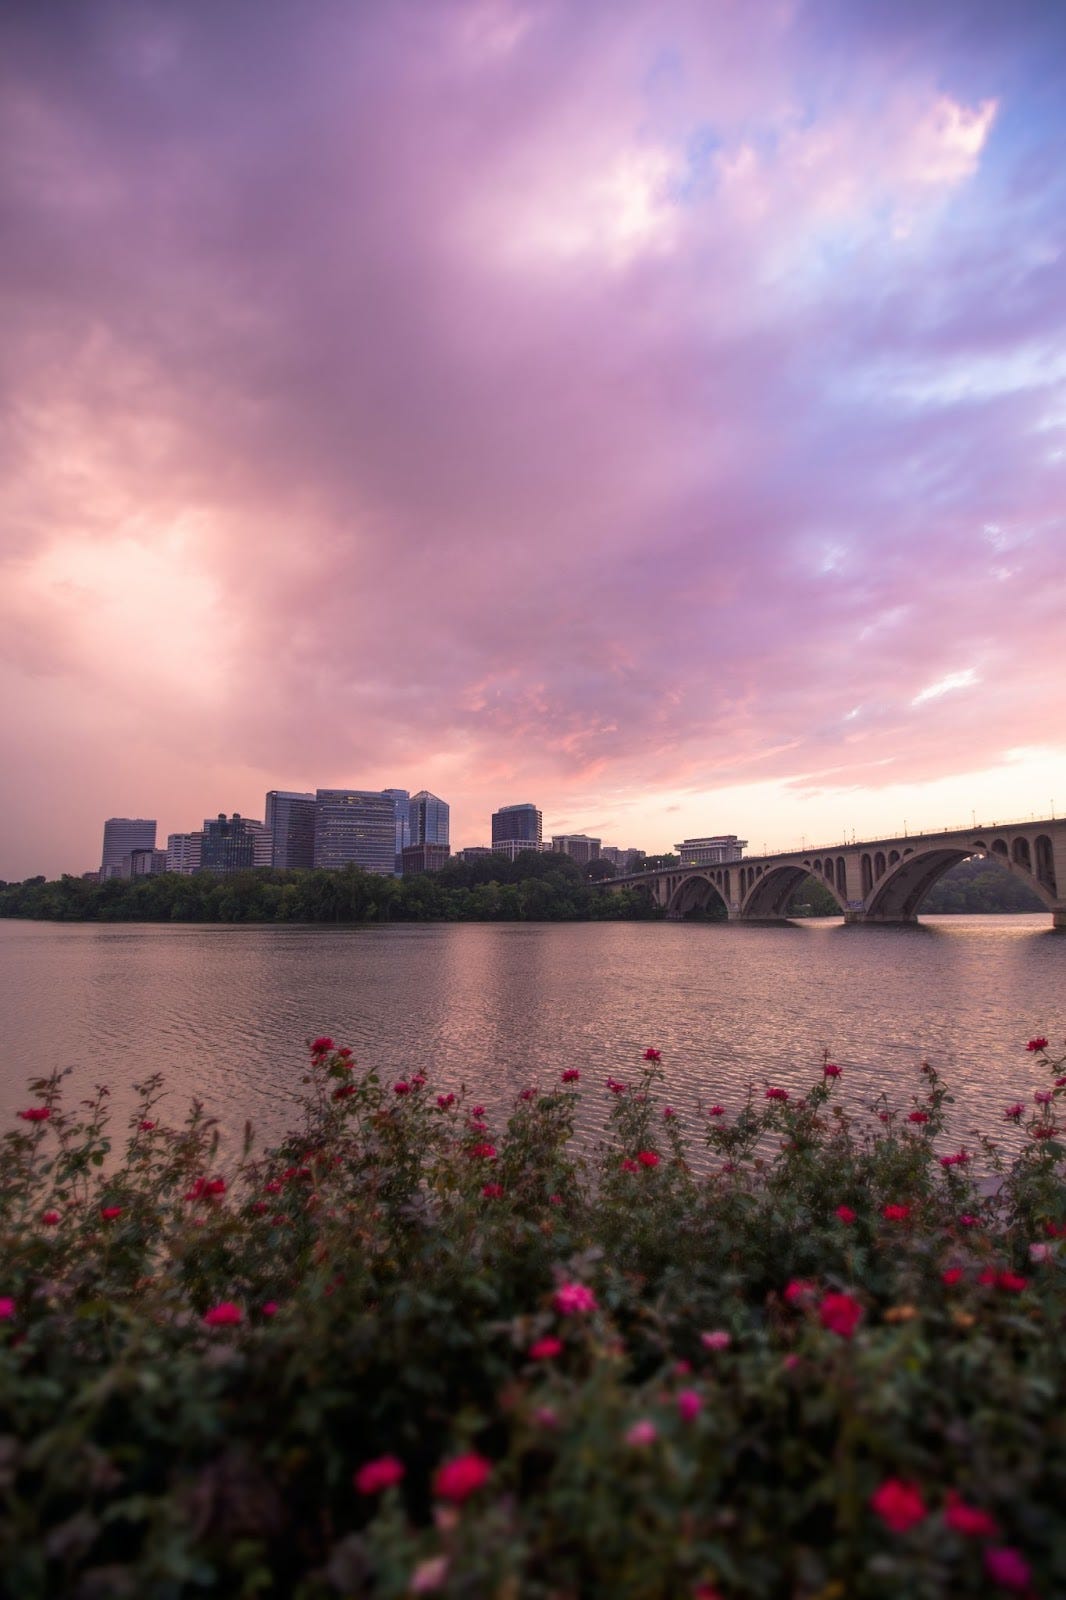 Looking over the Potomac toward Rosslyn